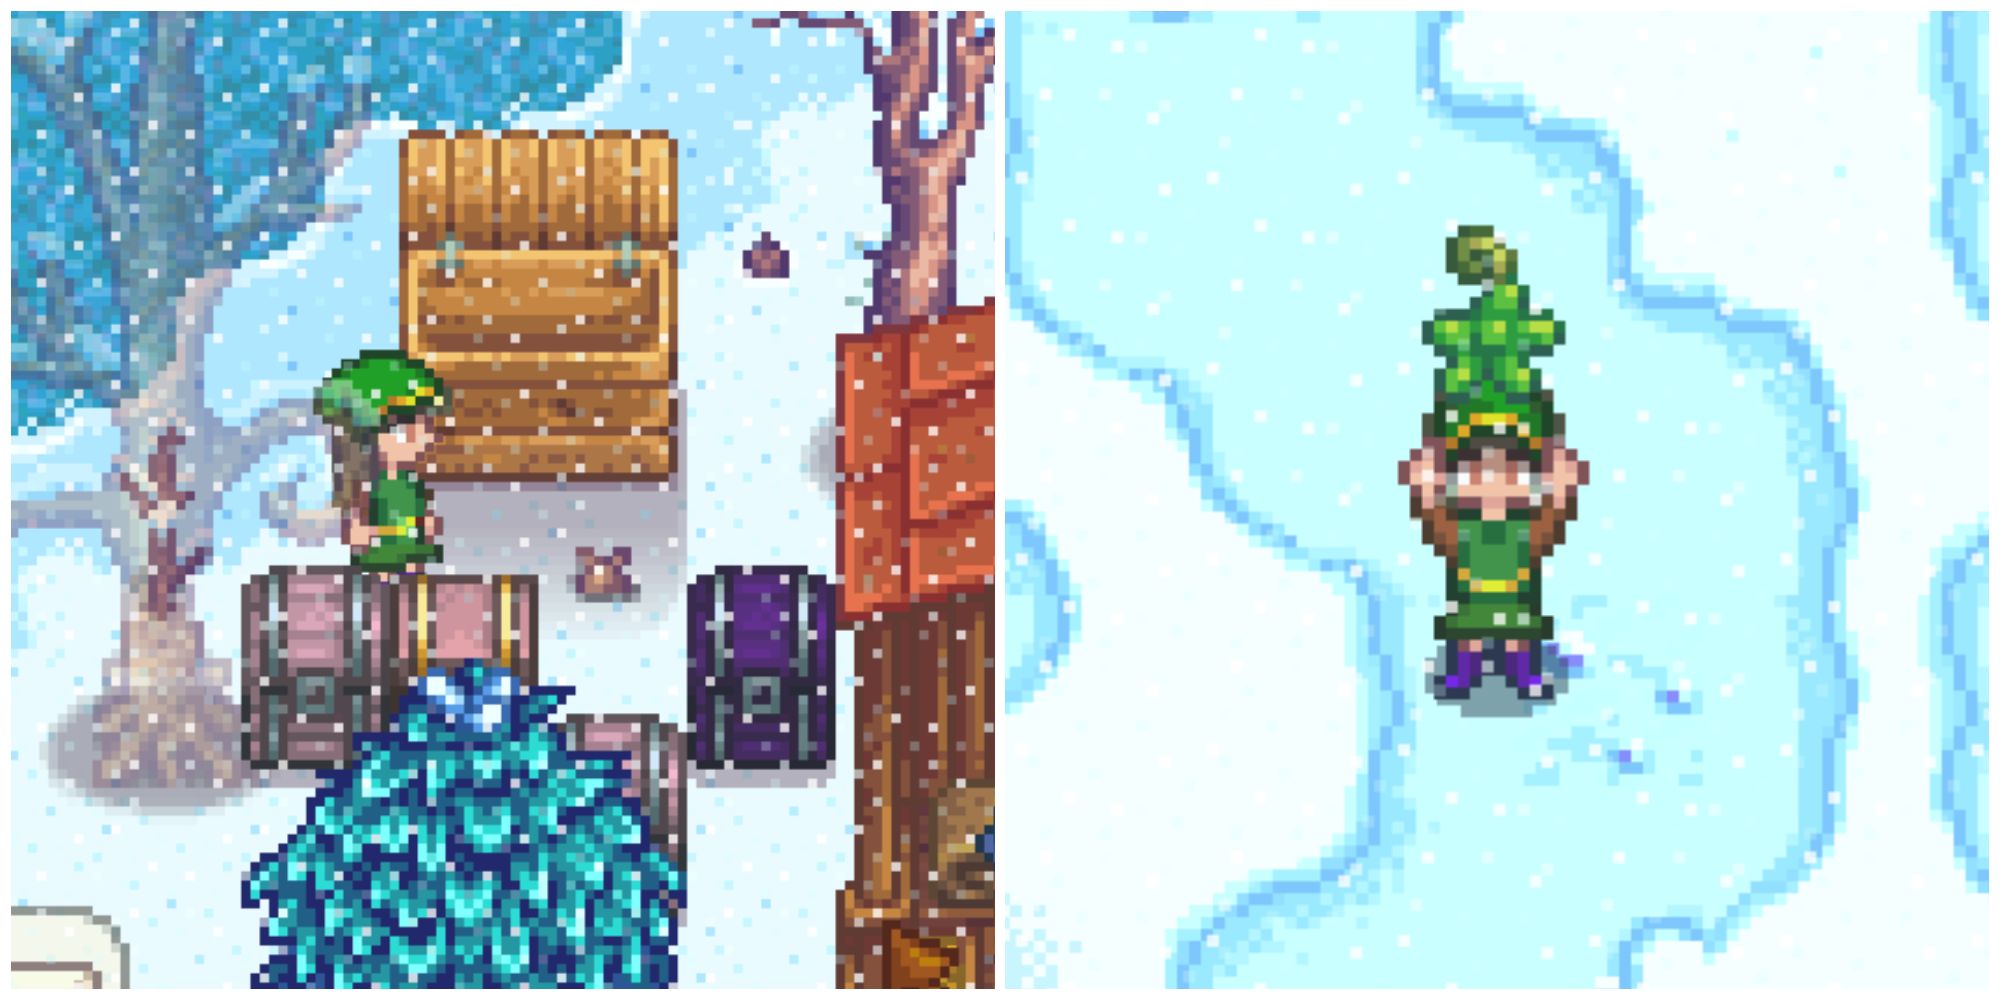 Split image of a mossy seed in the ground and a character holding a mossy seed in Stardew Valley